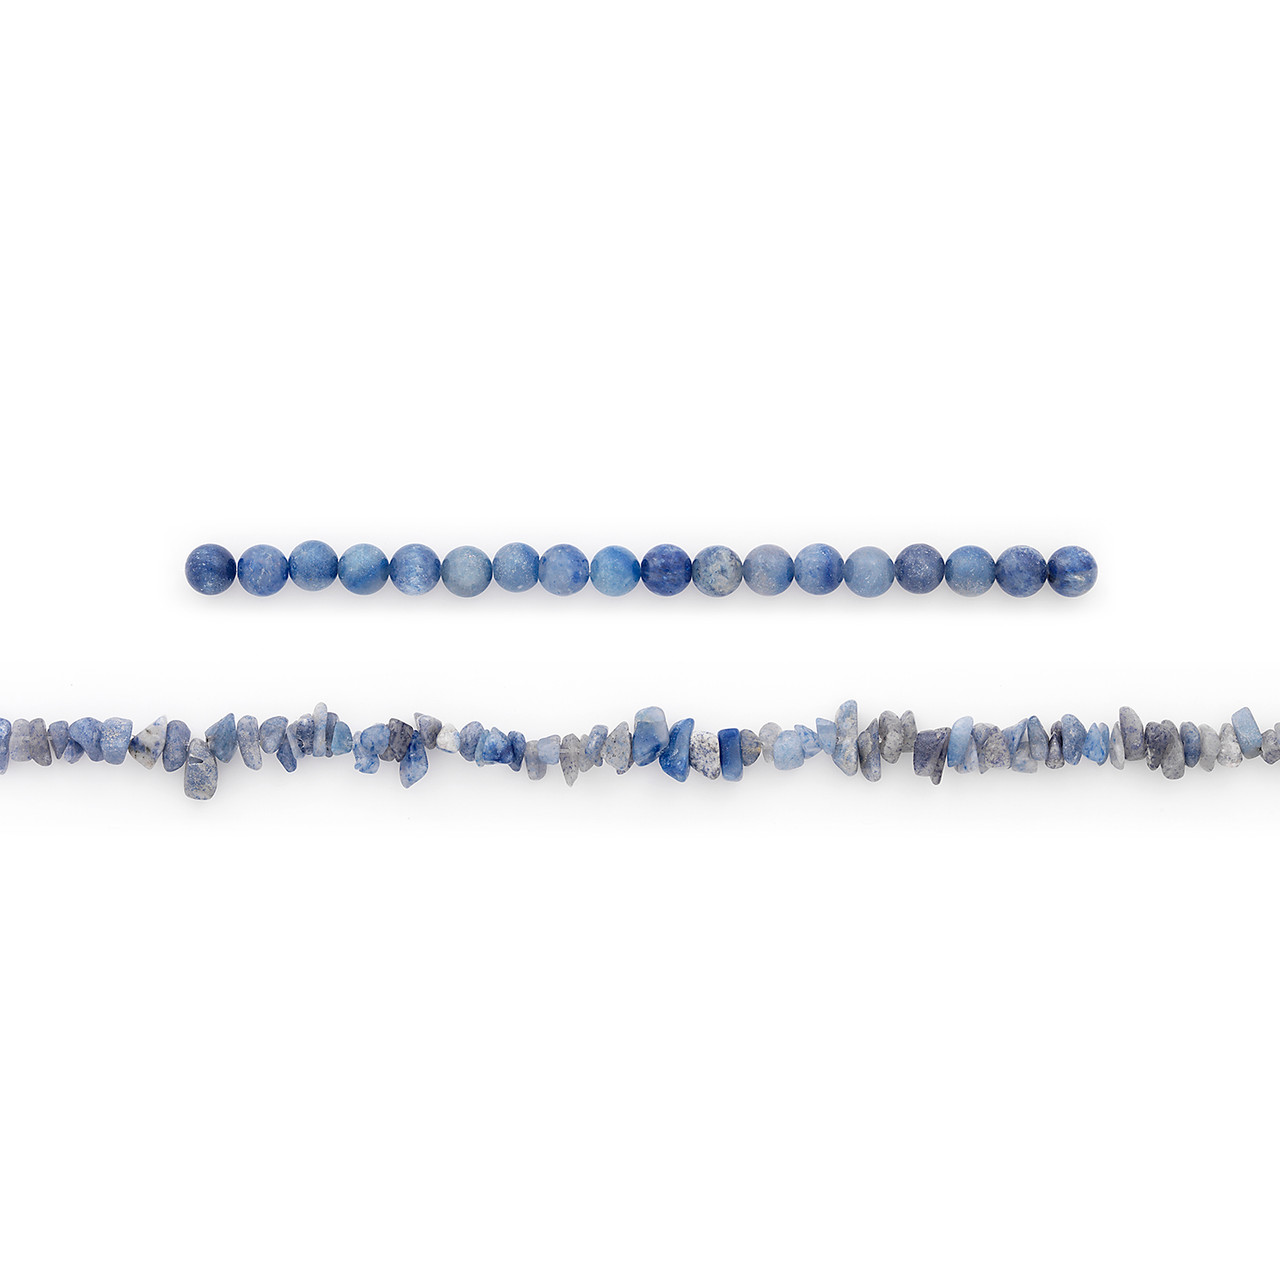 Blue Quartz Natural Gemstone Beads Collection Value Pack - Blue | Trims by The Yard